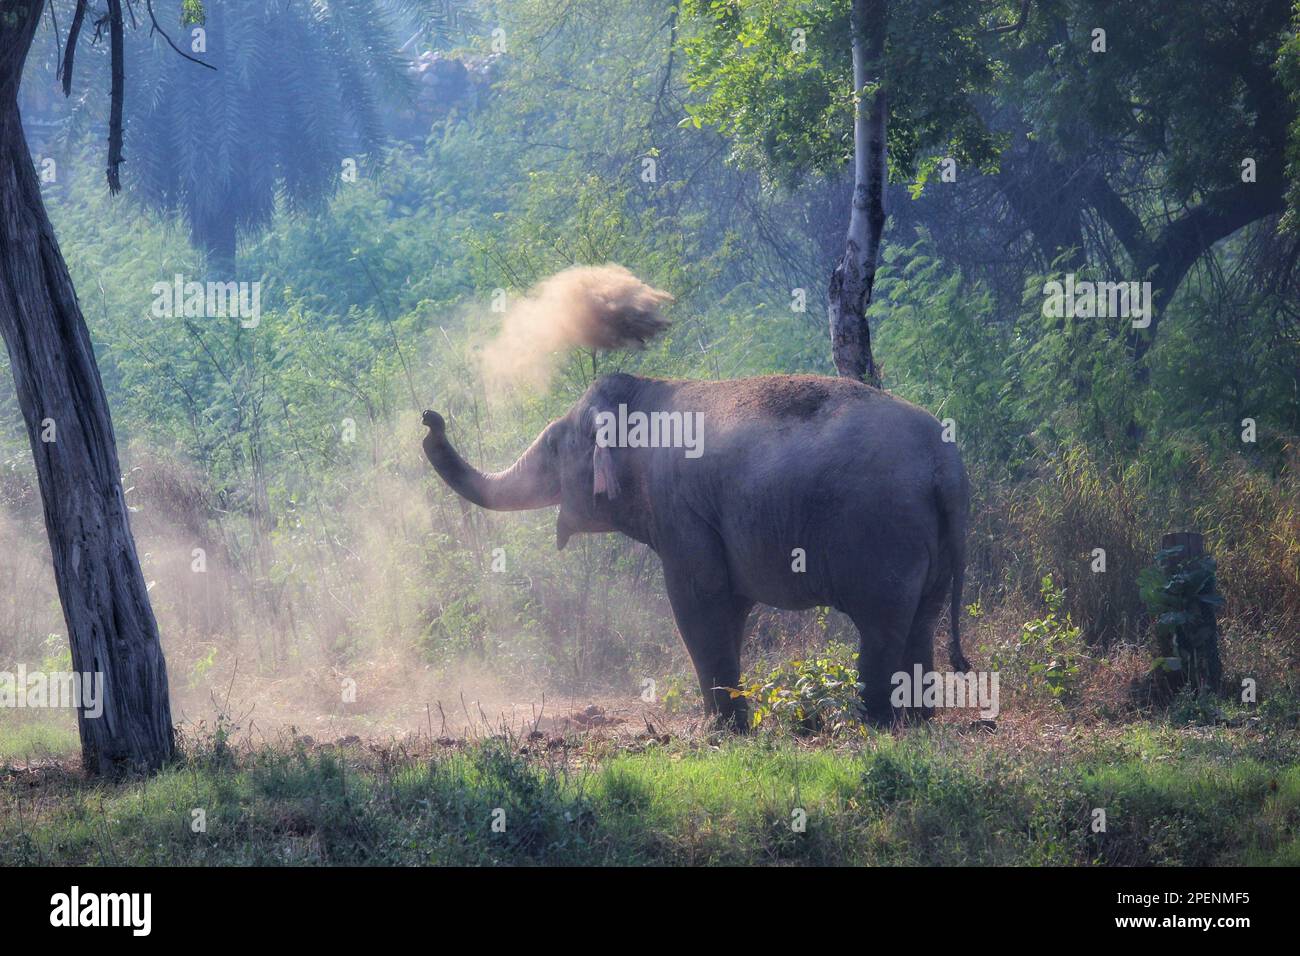 Young, happy male elephant having a sand dust bath spraying dust with his trunk in Delhi Zoo, India Stock Photo